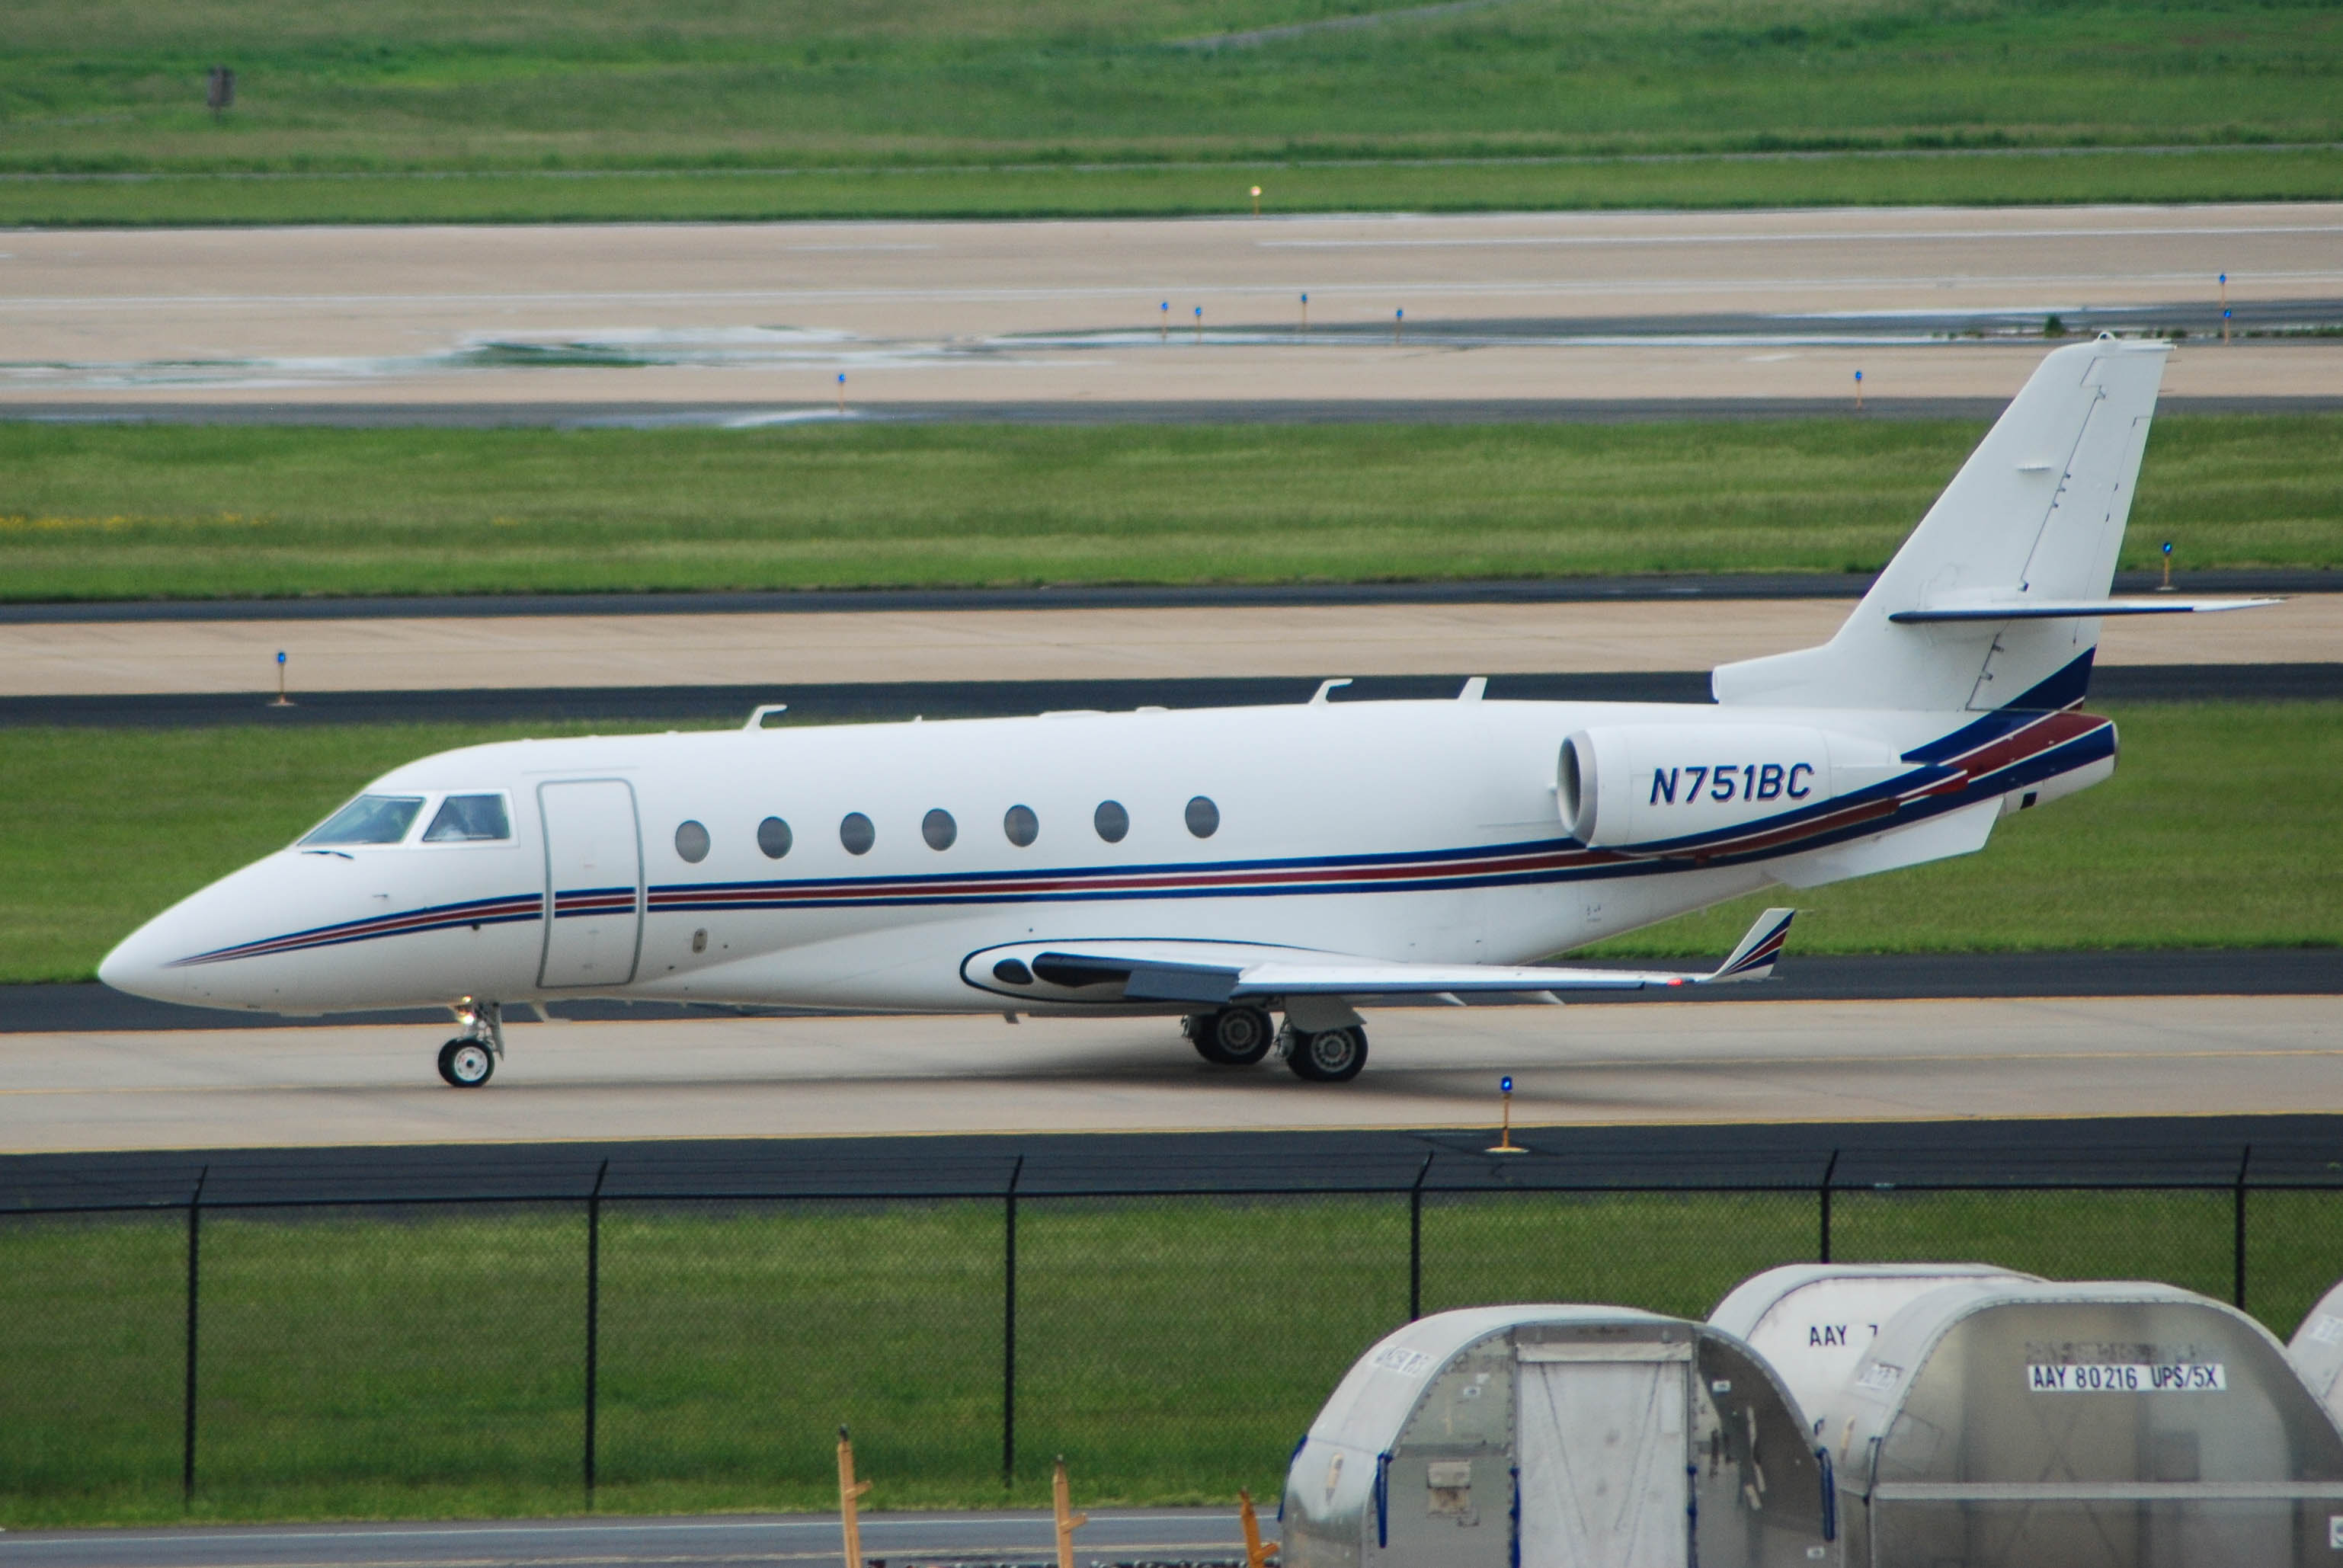 N751BC/N751BC Corporate Israeli Aircraft Industries G200 Photo by colinw - AVSpotters.com